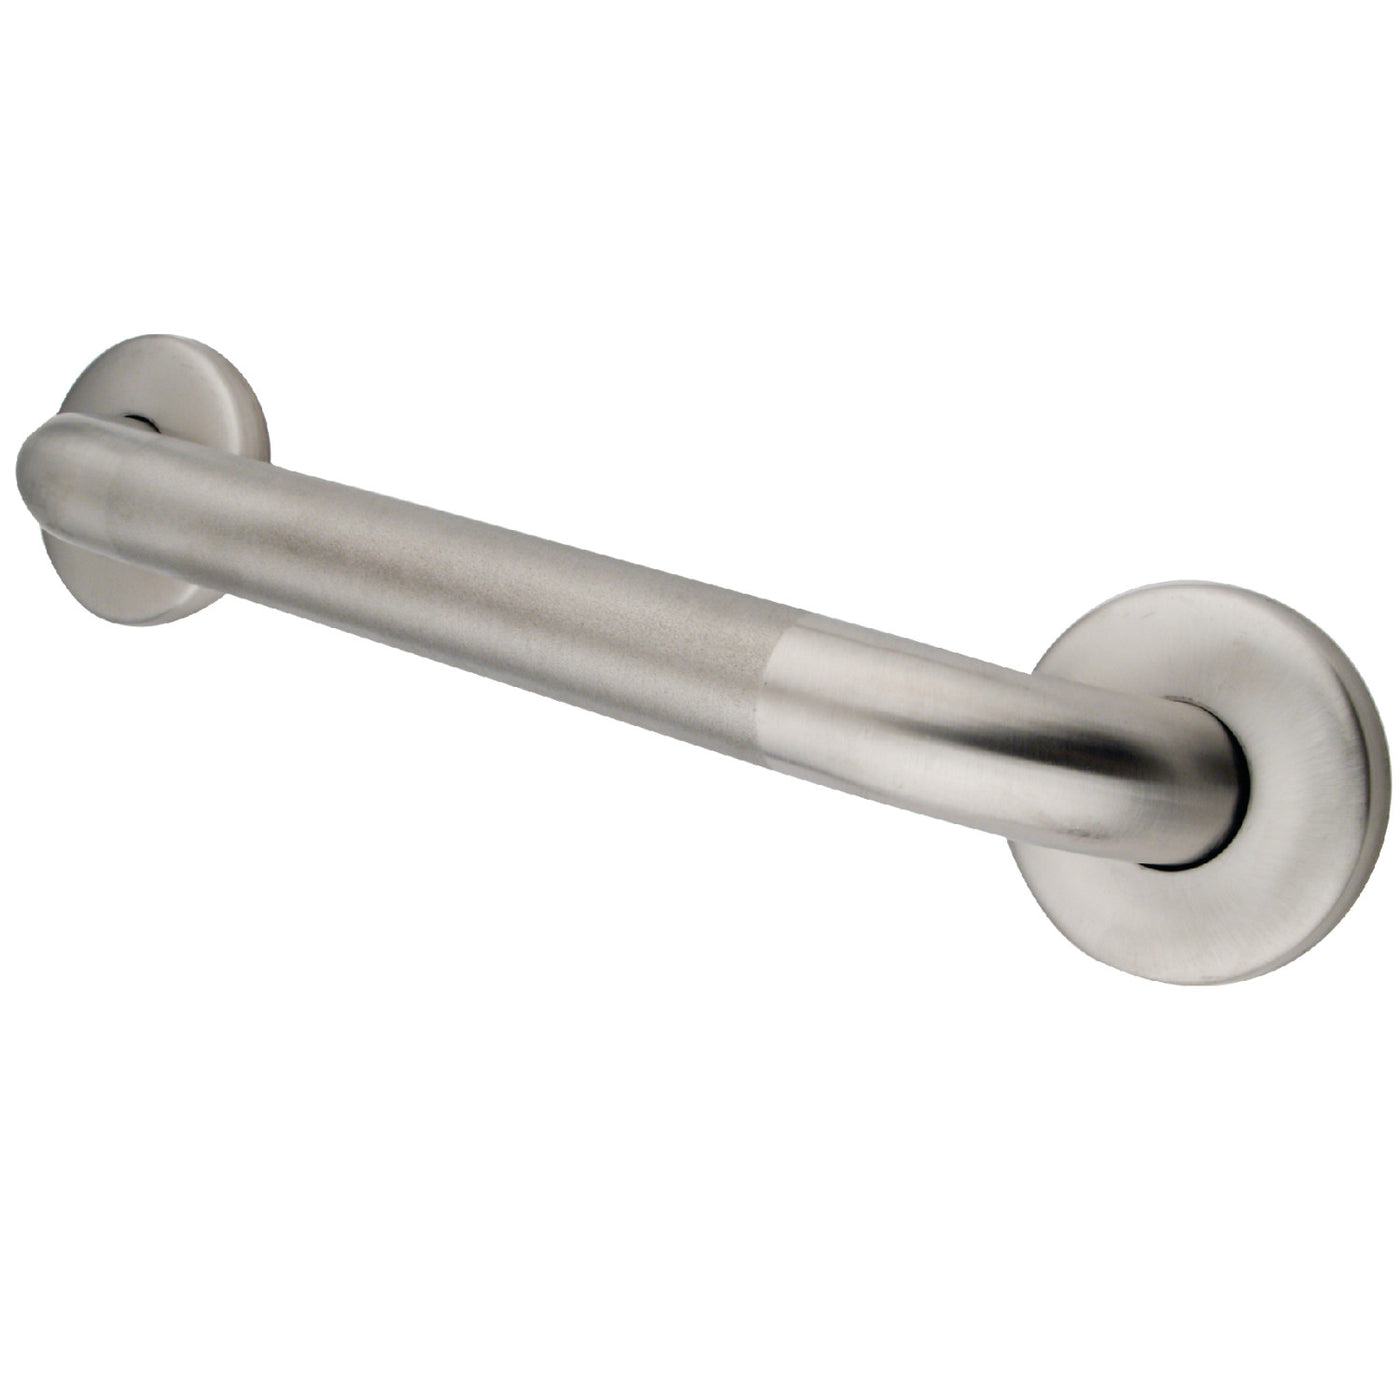 Elements of Design EGB1442CT 42-Inch Stainless Steel Grab Bar, Brushed